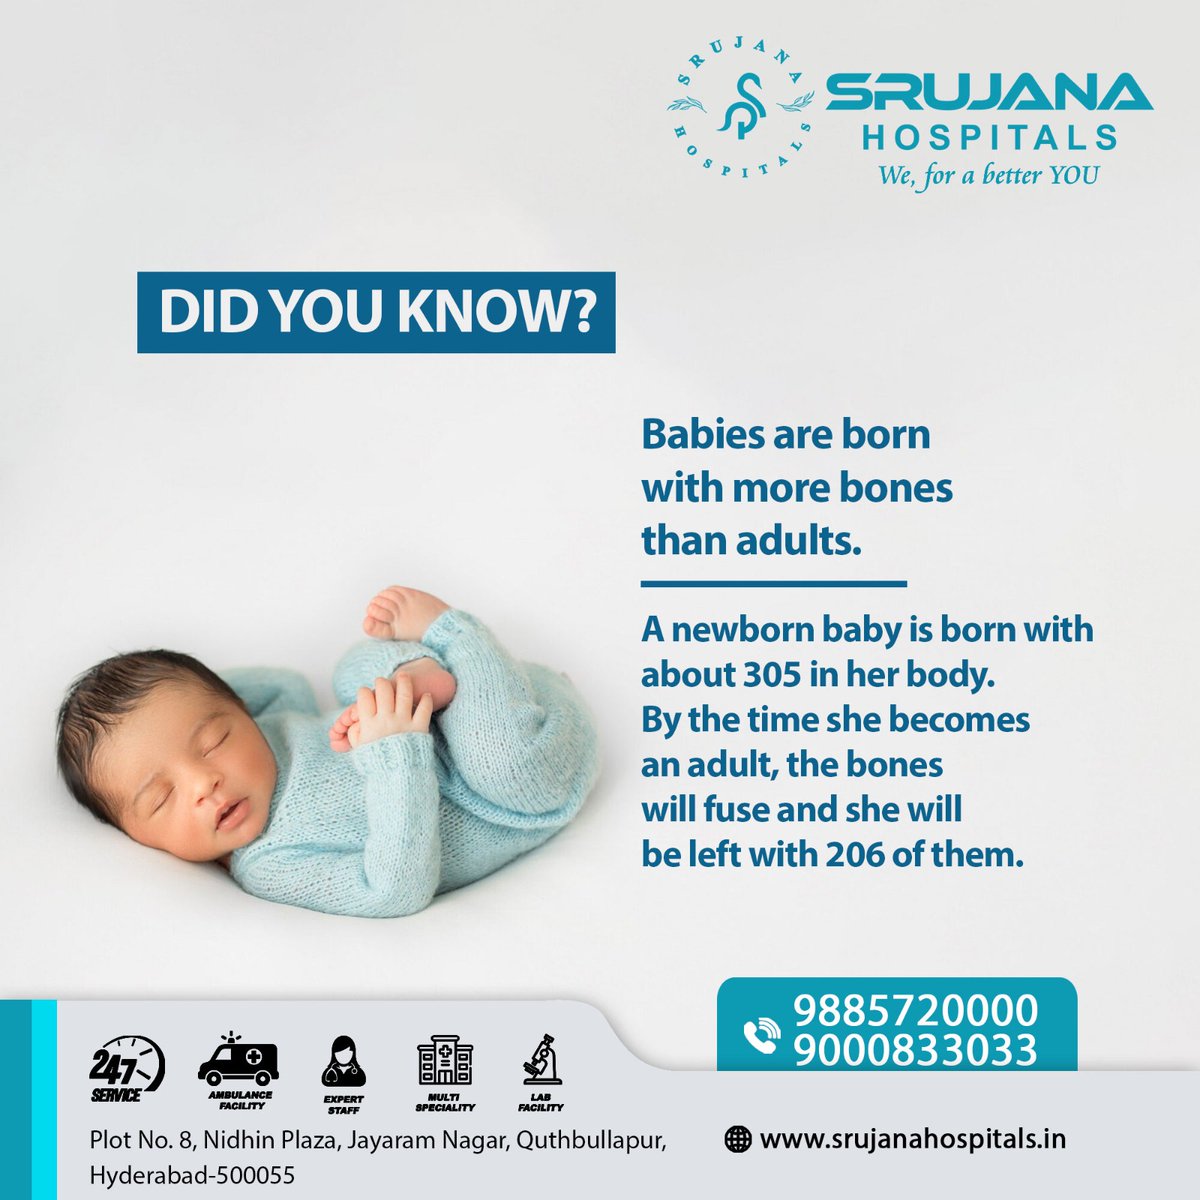 Did You Know? #DidYouKnow #DidYouKnowThis #NeckCurve #BloodFlow #Srujanahospitals #Quthbullapur #Hyderabad